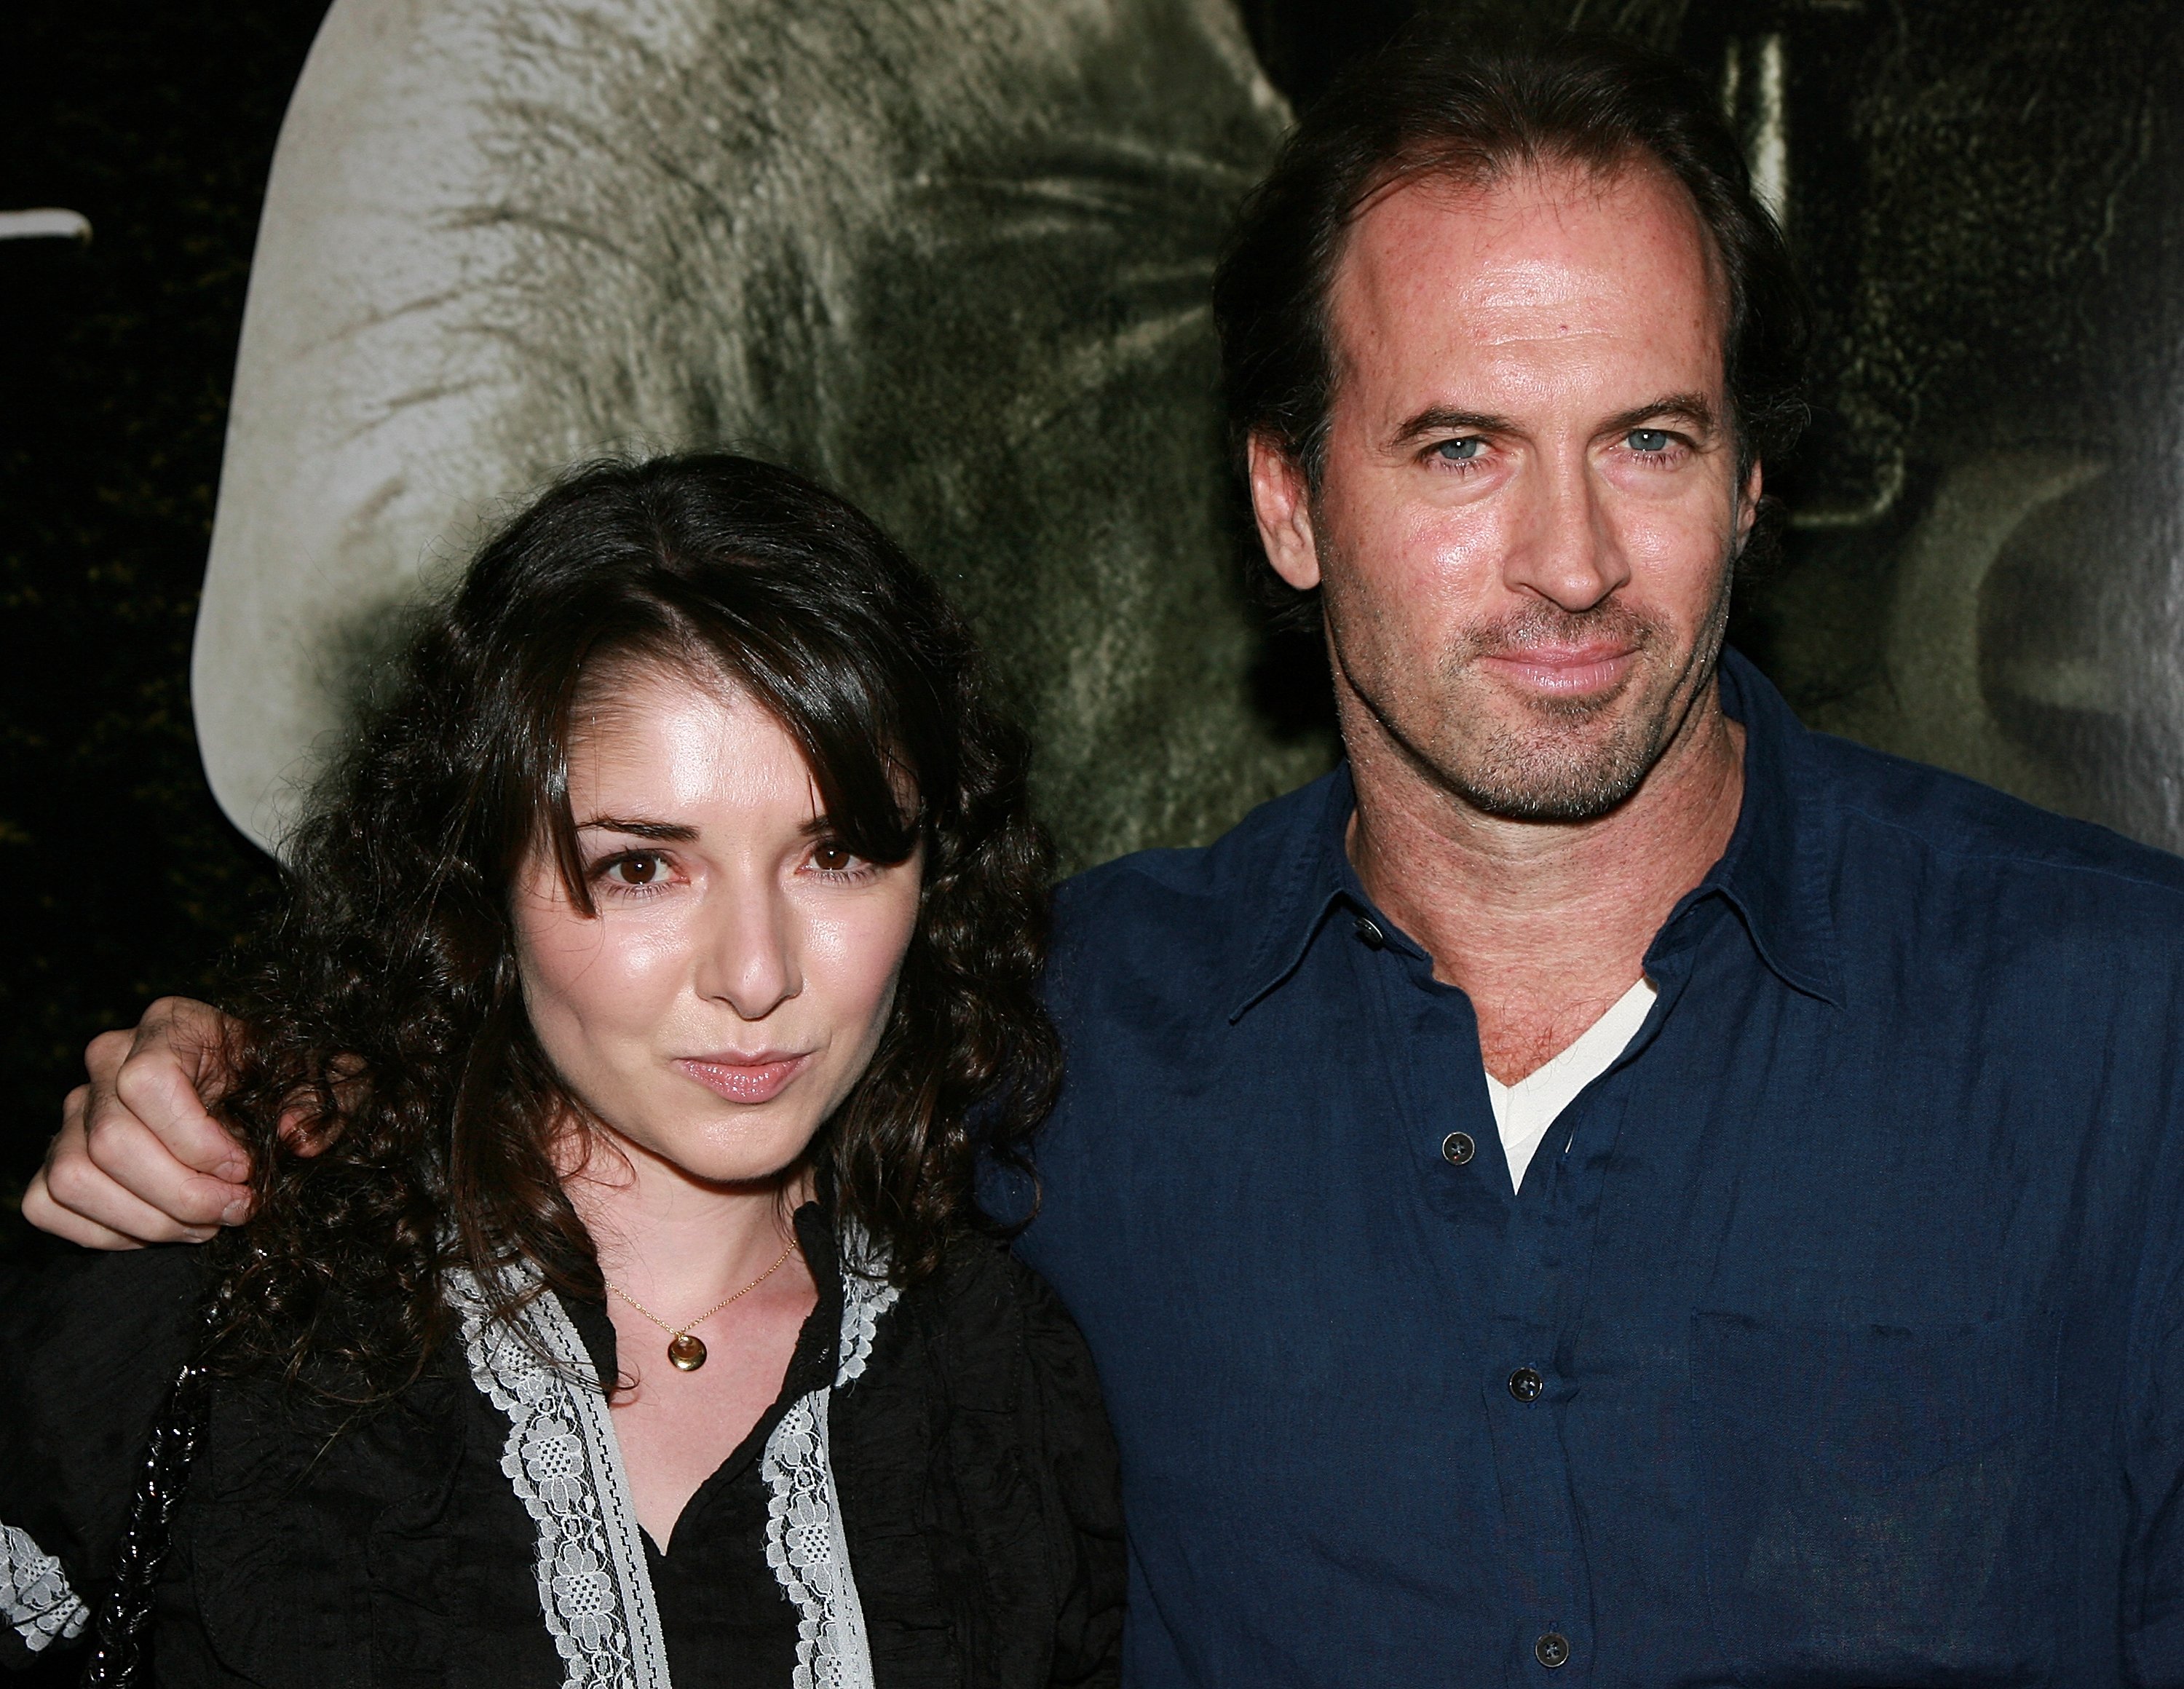 Actors Scott Patterson and Kristine Saryan at the premiere of Lionsgate's "Saw V" at Mann's Chinese Six on October 21, 2008, in Hollywood, California. | Source: Getty Images